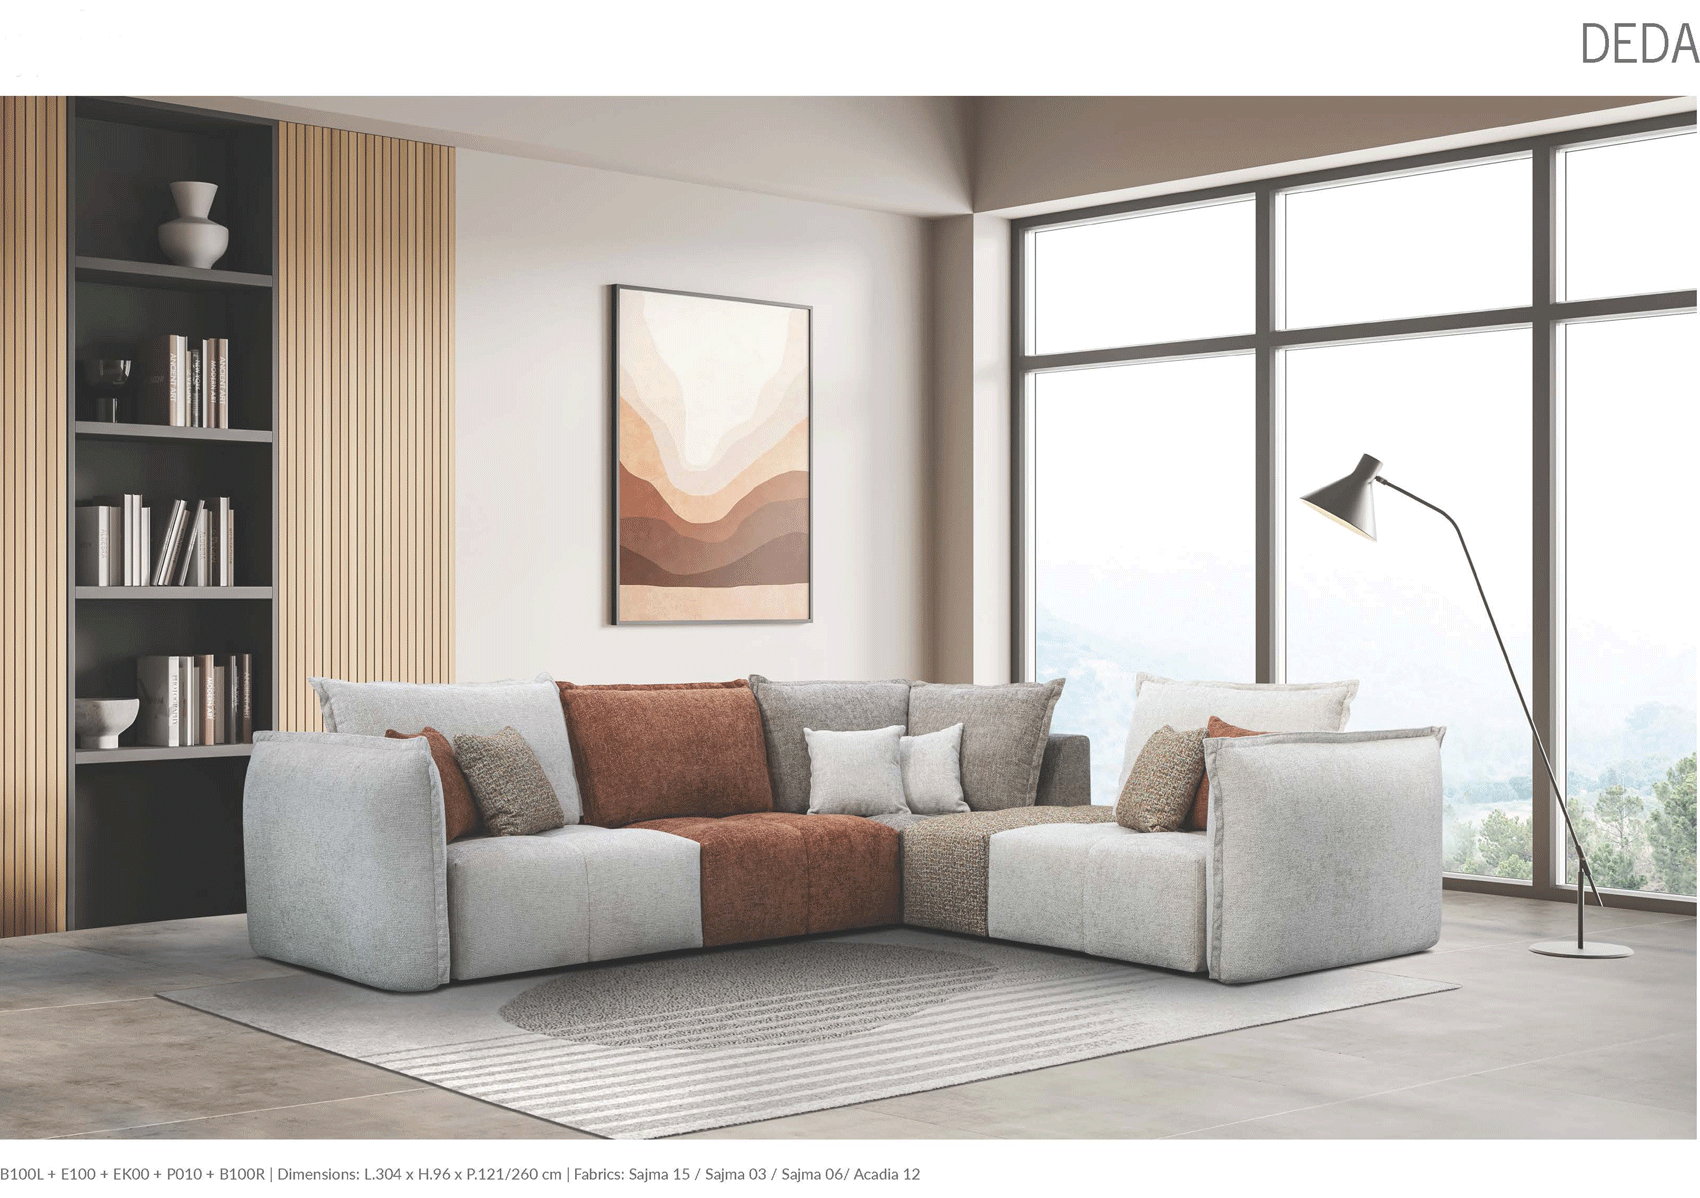 Living Room Furniture Reclining and Sliding Seats Sets Deda Sectional